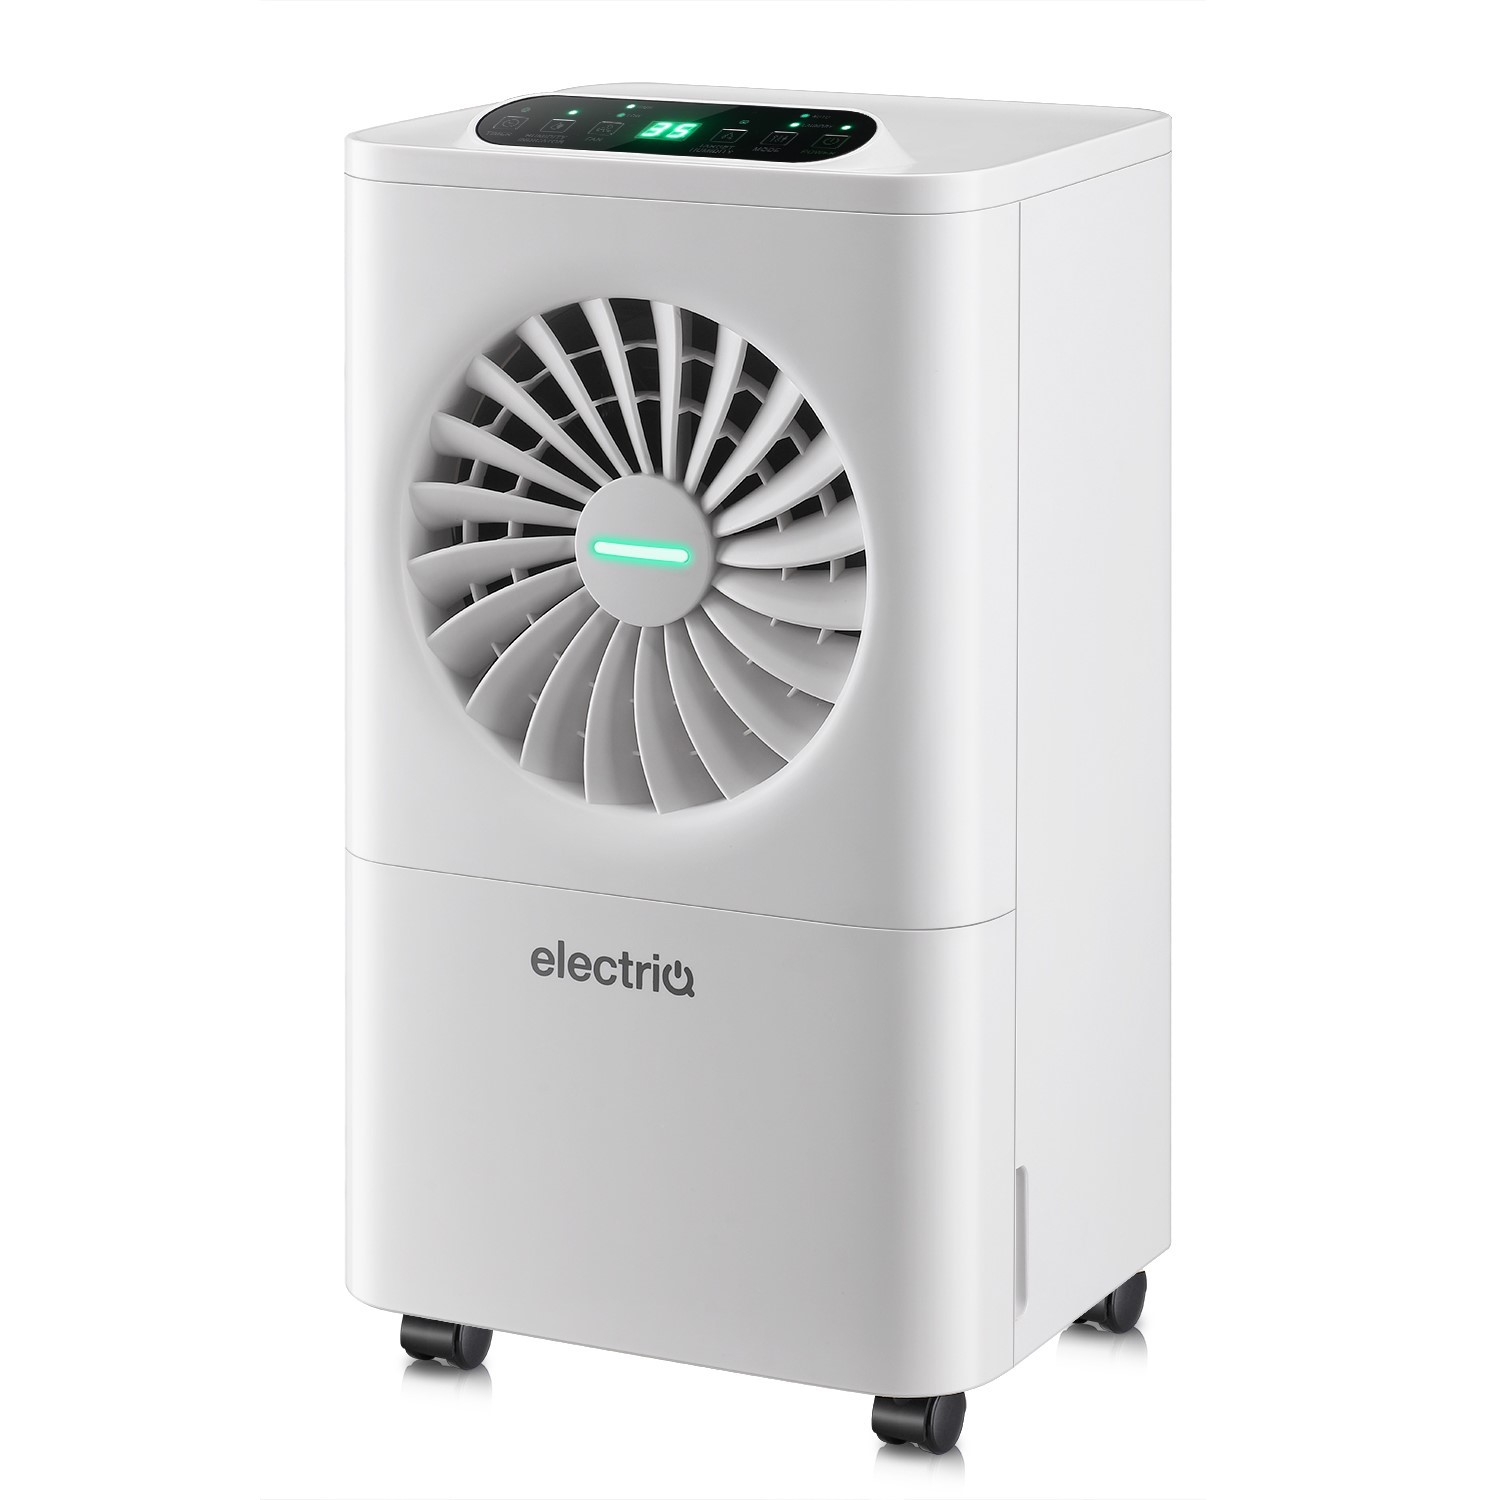 10 Litre Dehumidifier with Laundry Mode and Humidistat